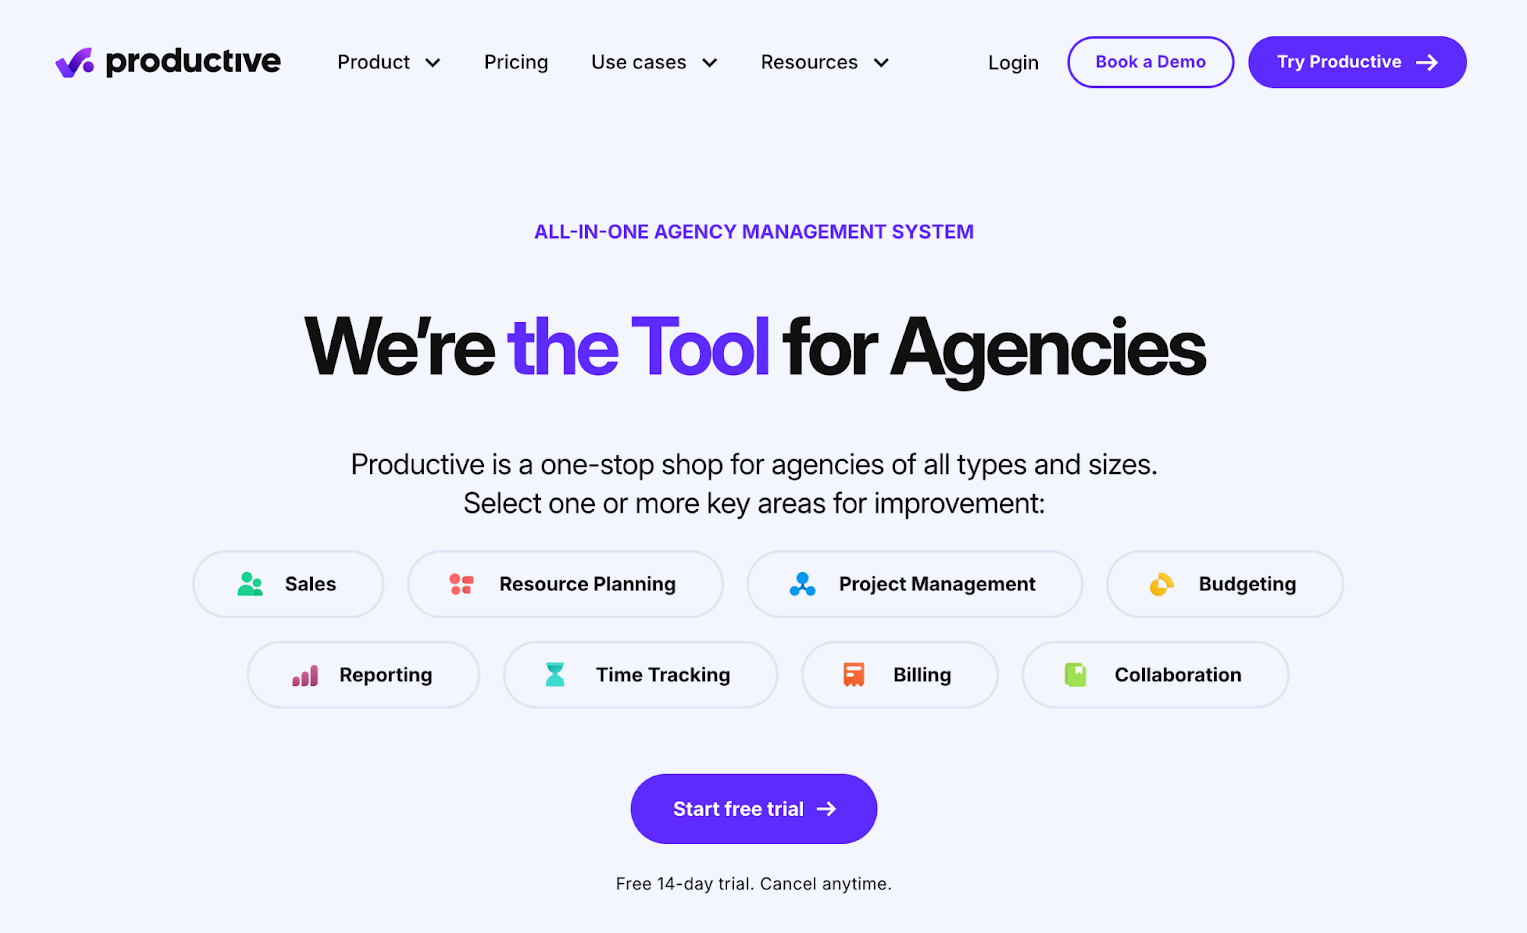 Productive homepage: We're the Tool for Agencies